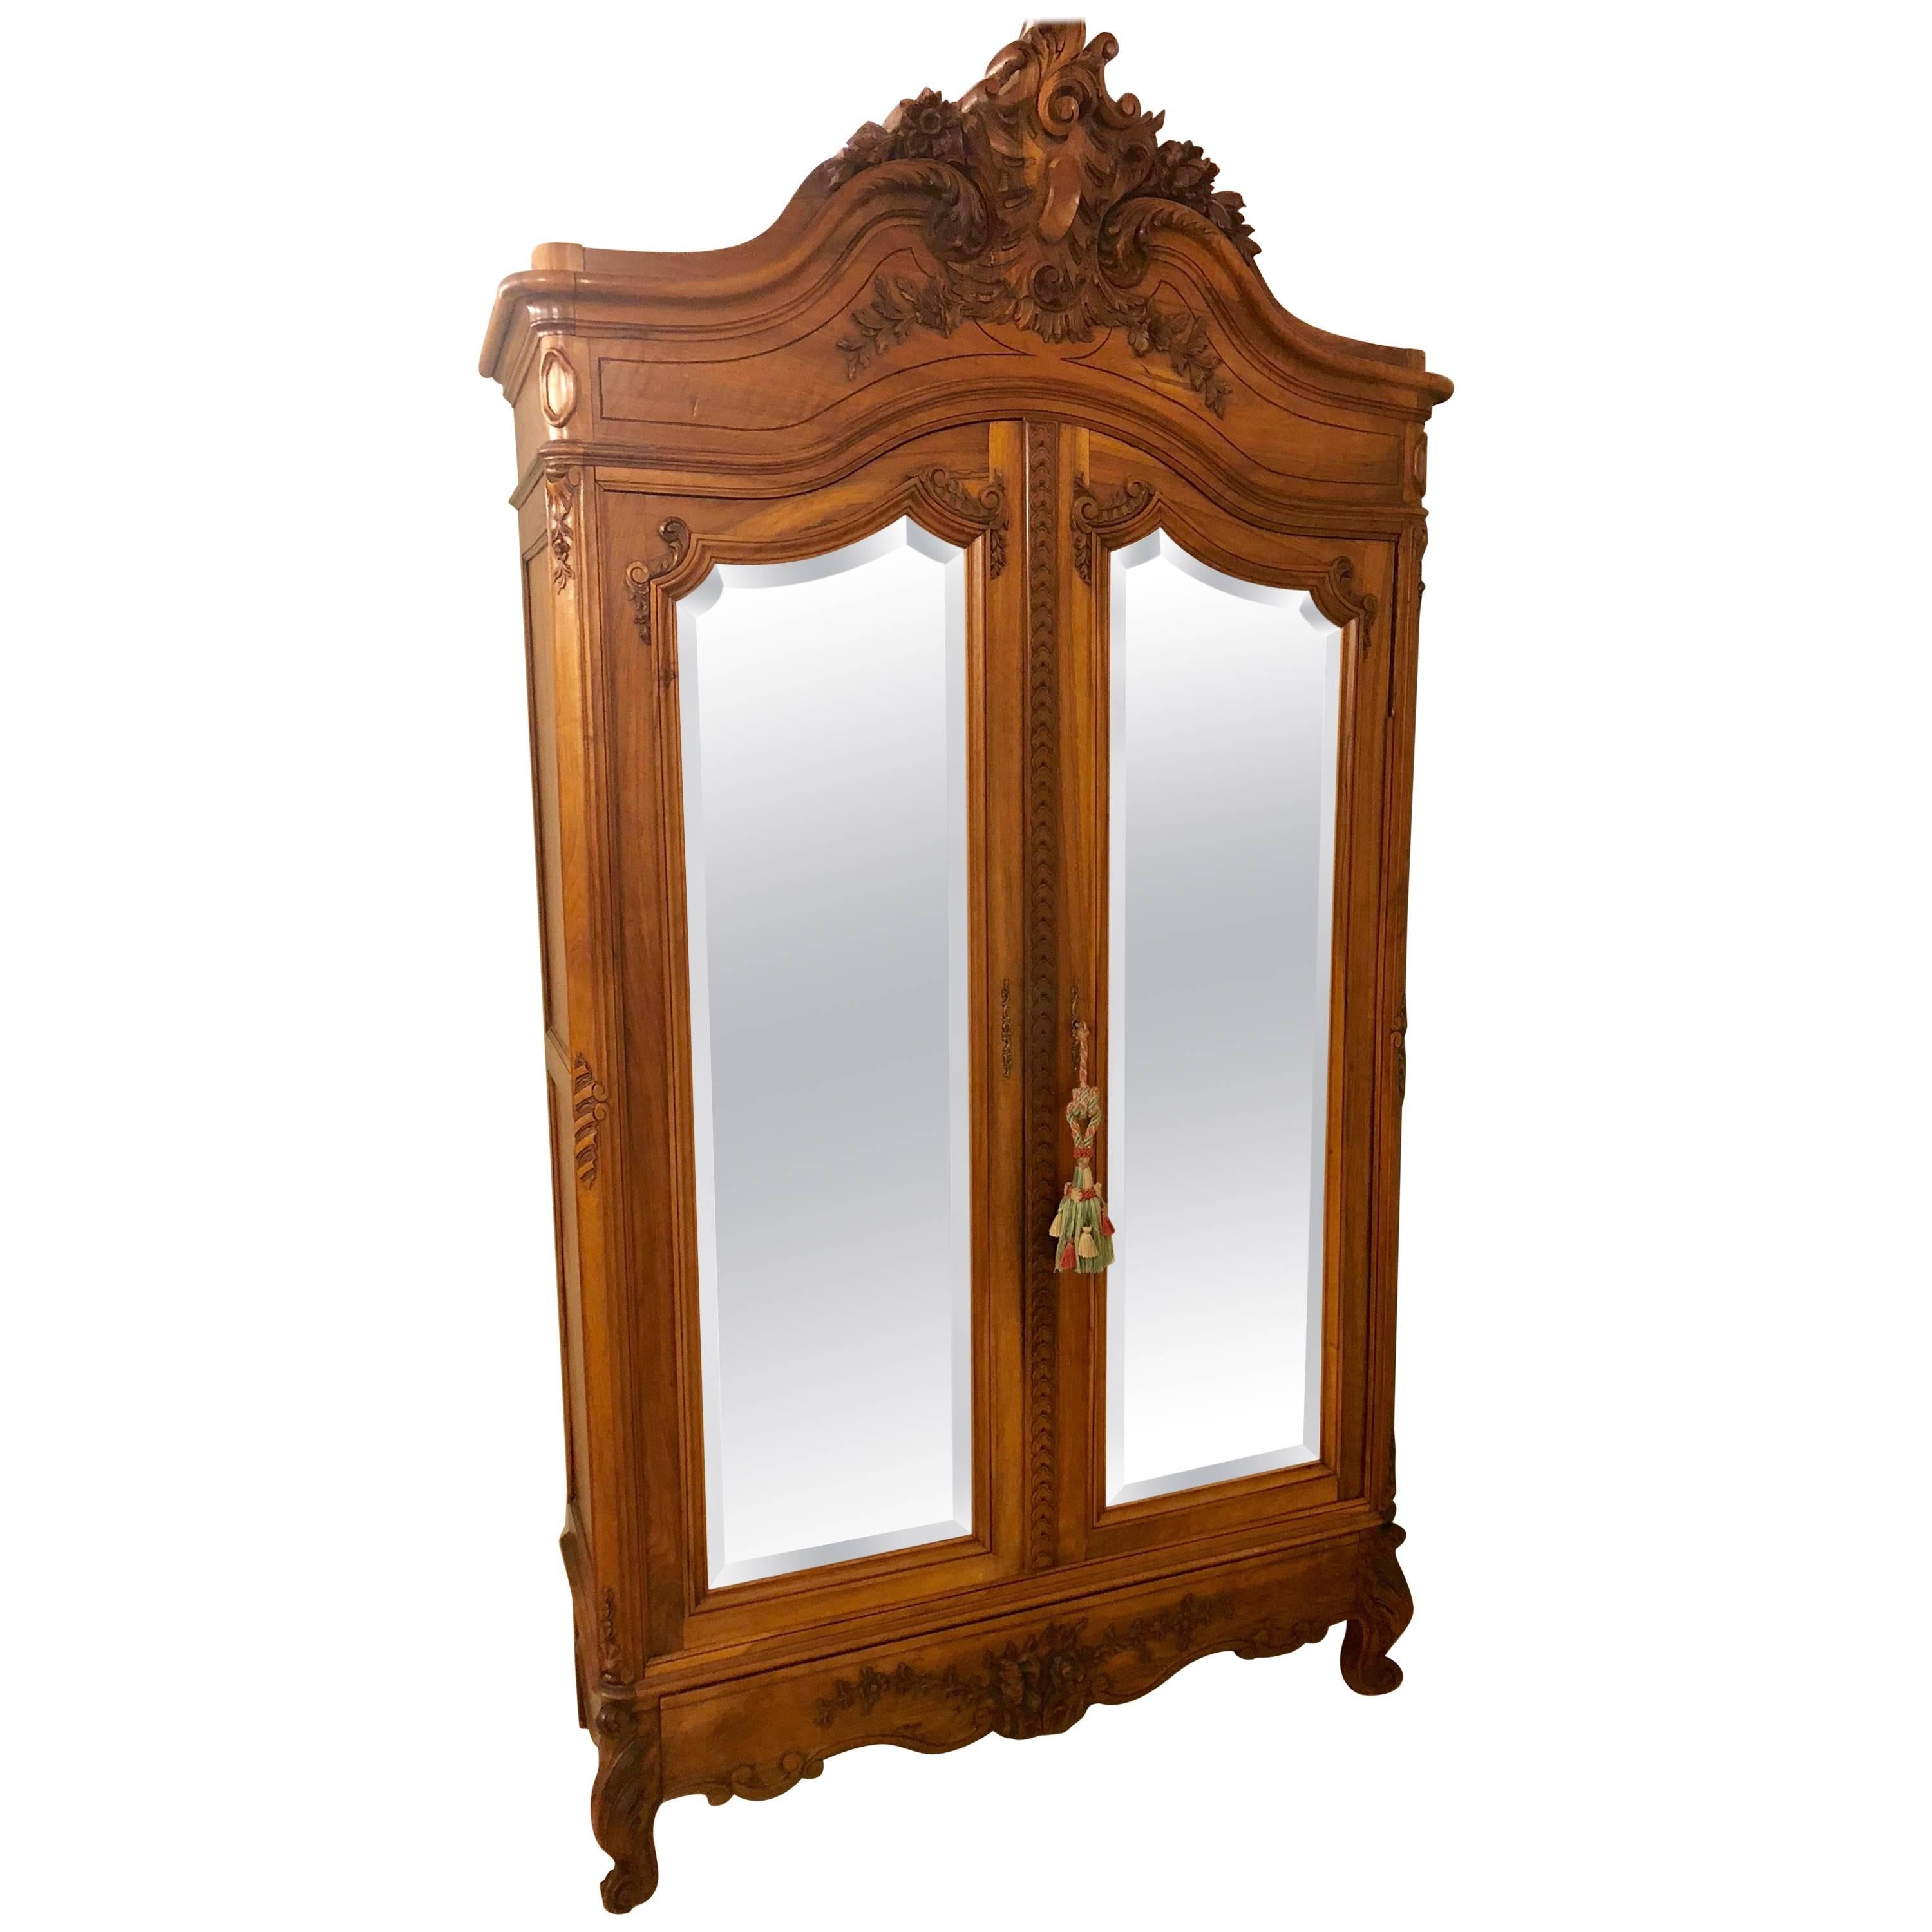 19th Century Two-Door Bevelled Mirror Front Armoire / Wardrobe Louis XV Style